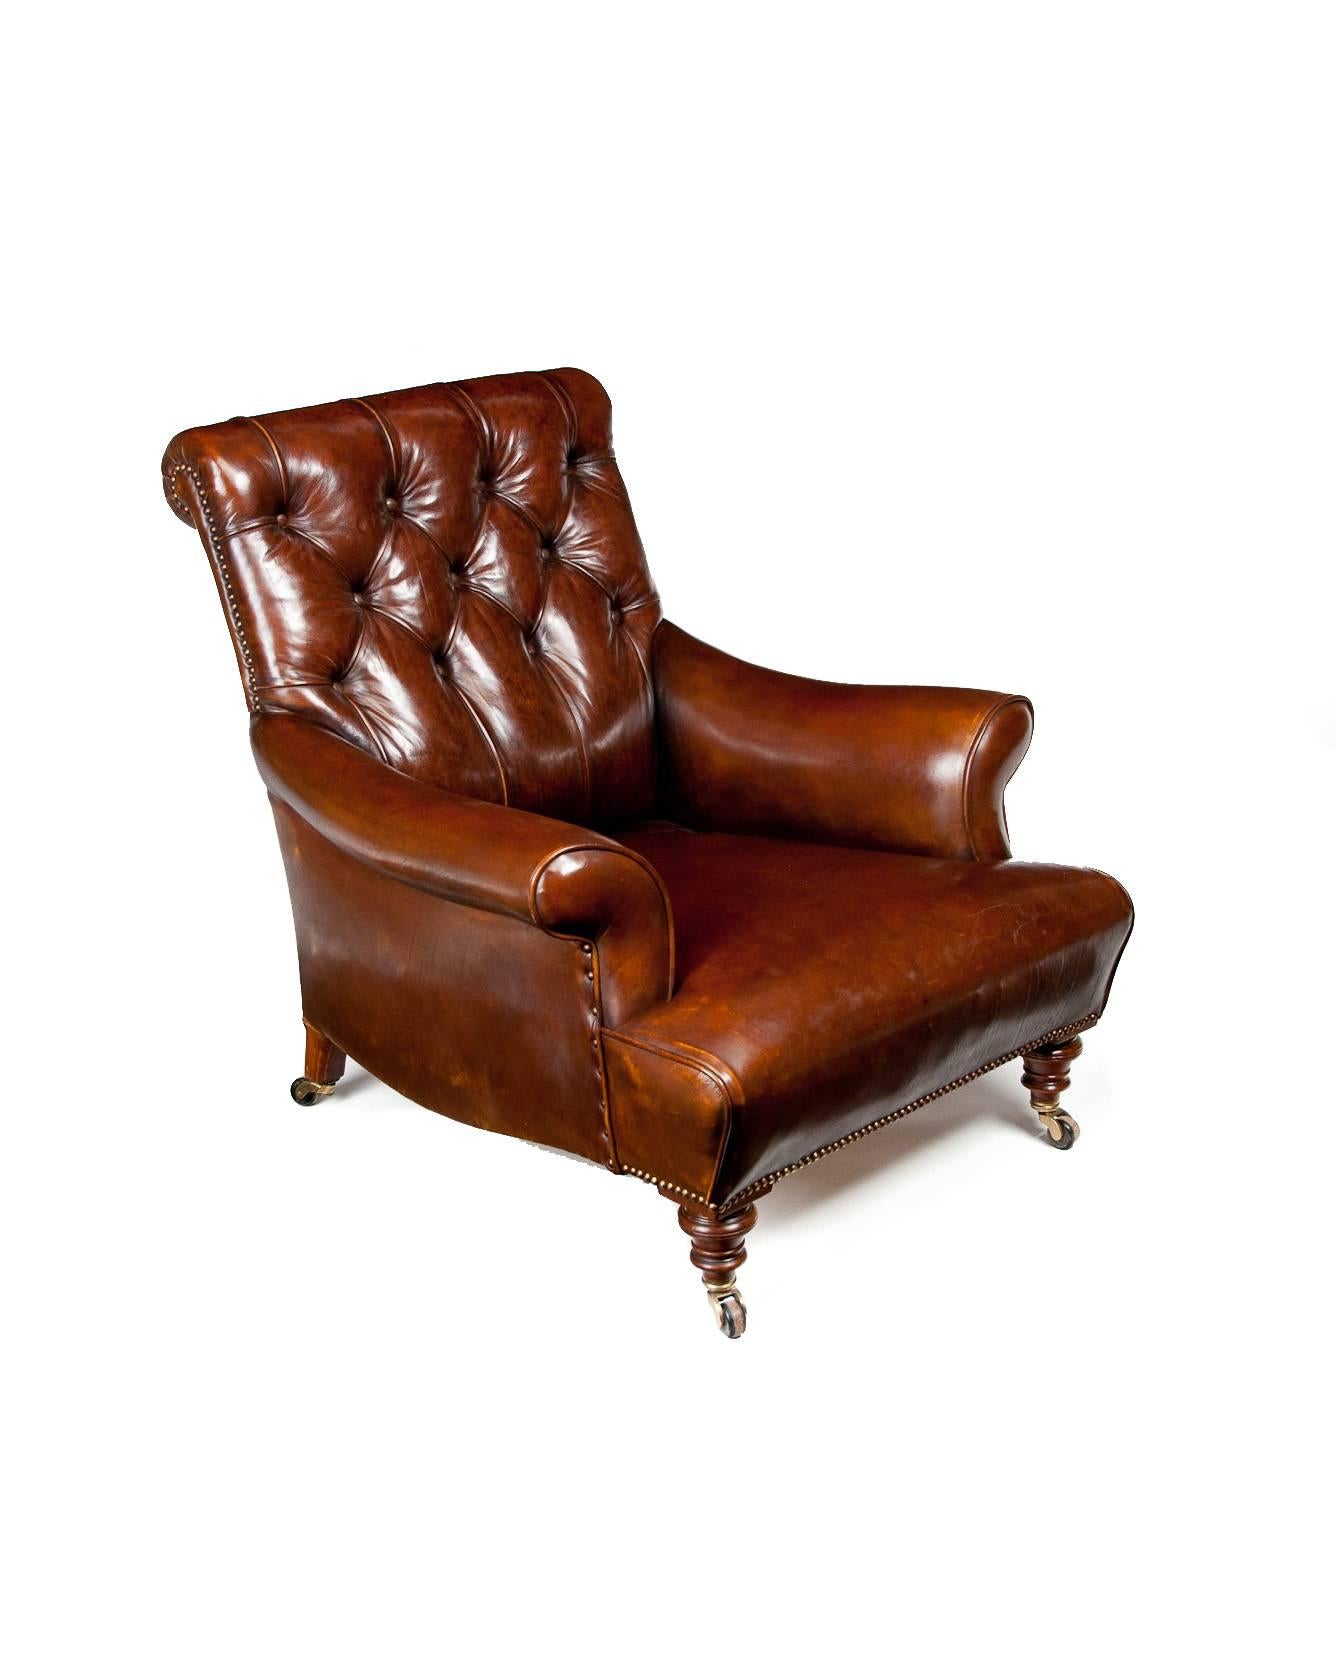 English 19th Century Victorian Walnut Leather Armchair Shoolbred